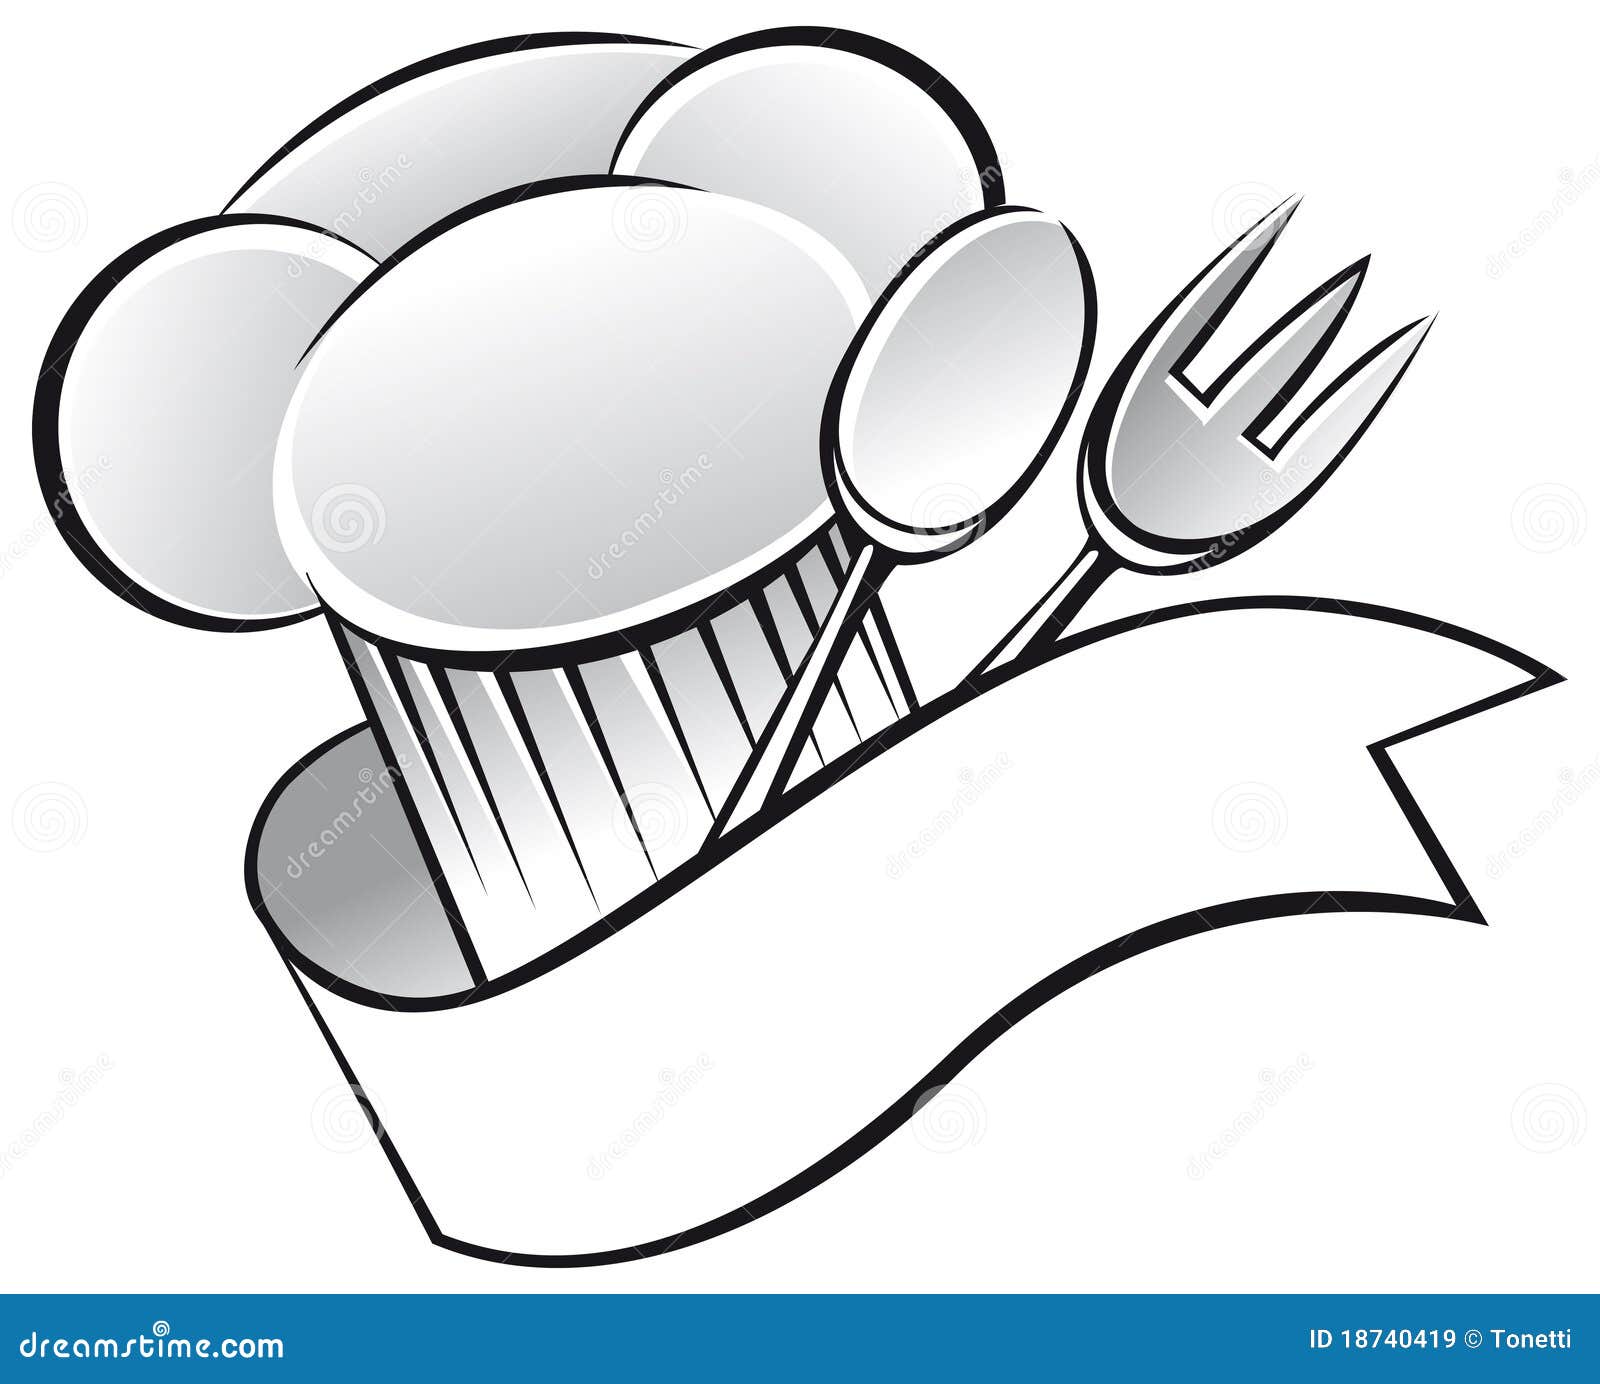 clipart cook hat - photo #22